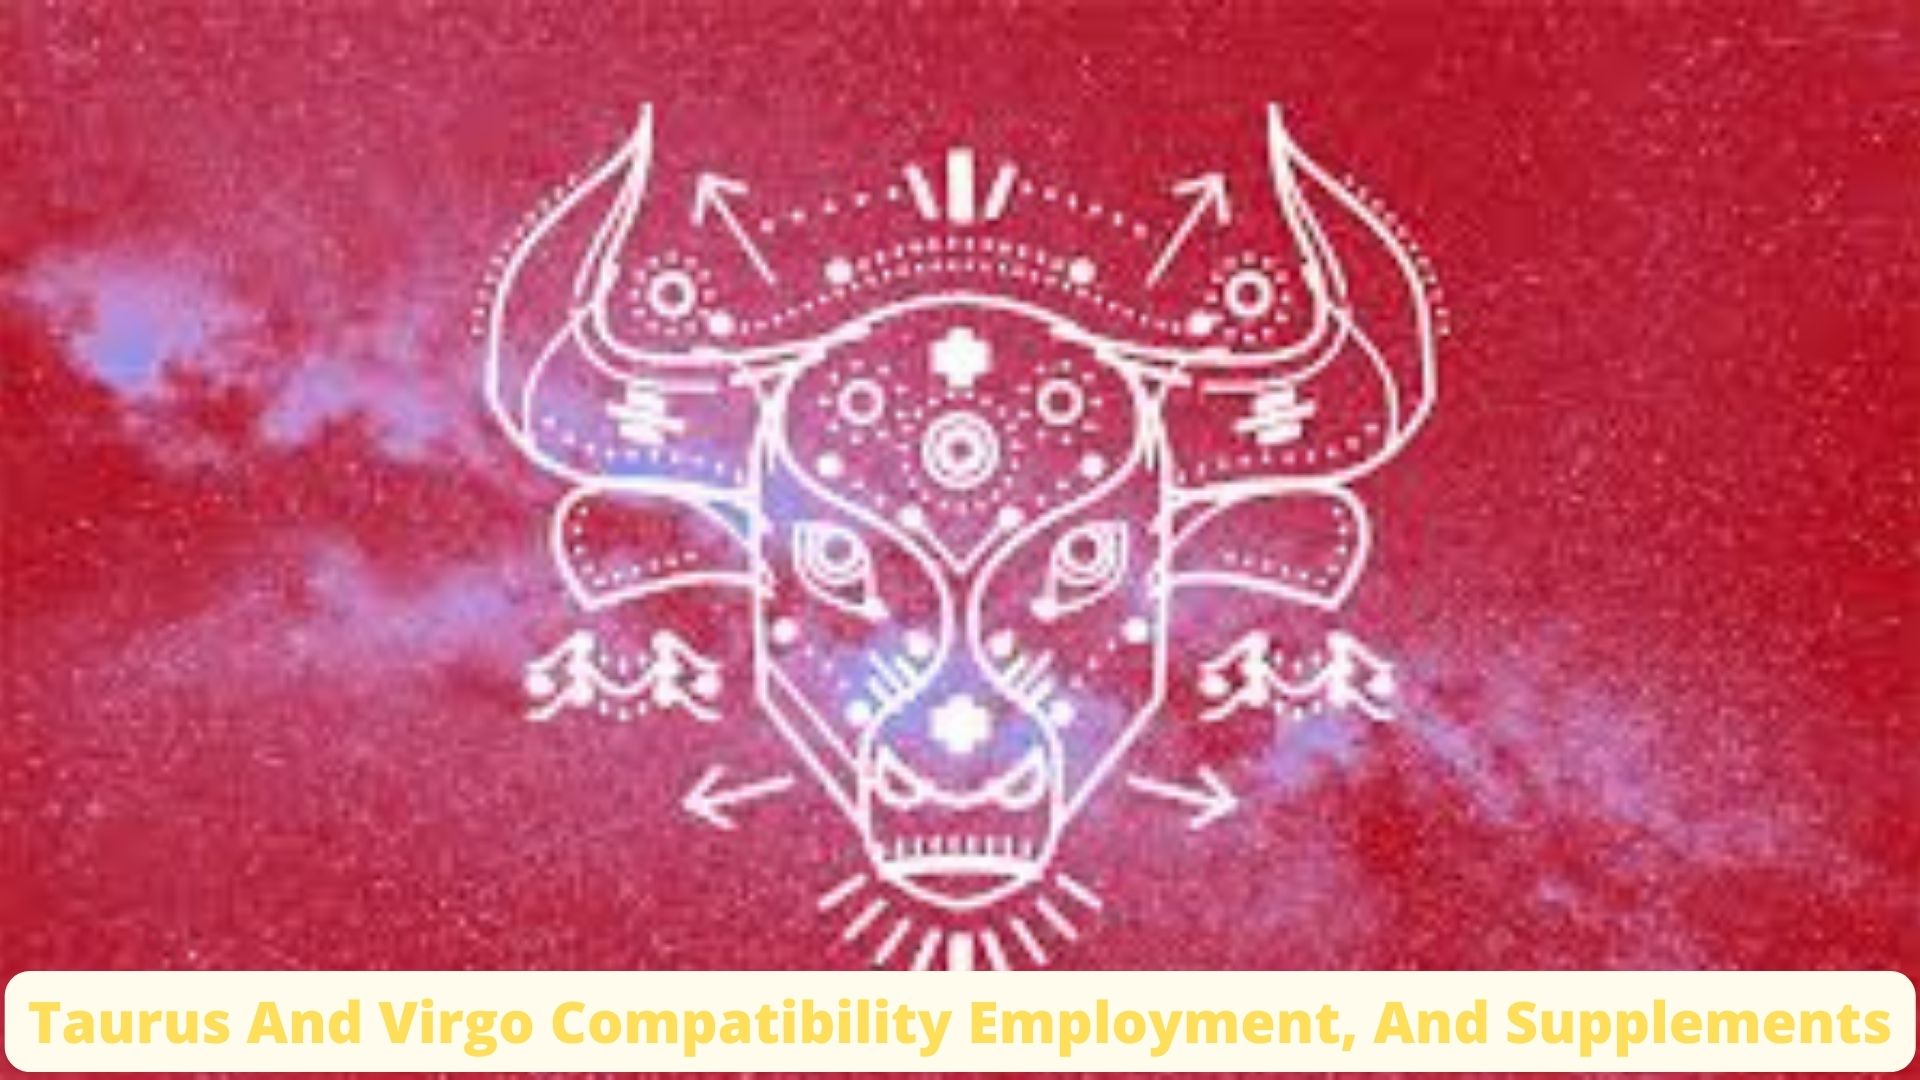 Taurus And Virgo Compatibility - Employment And Supplements